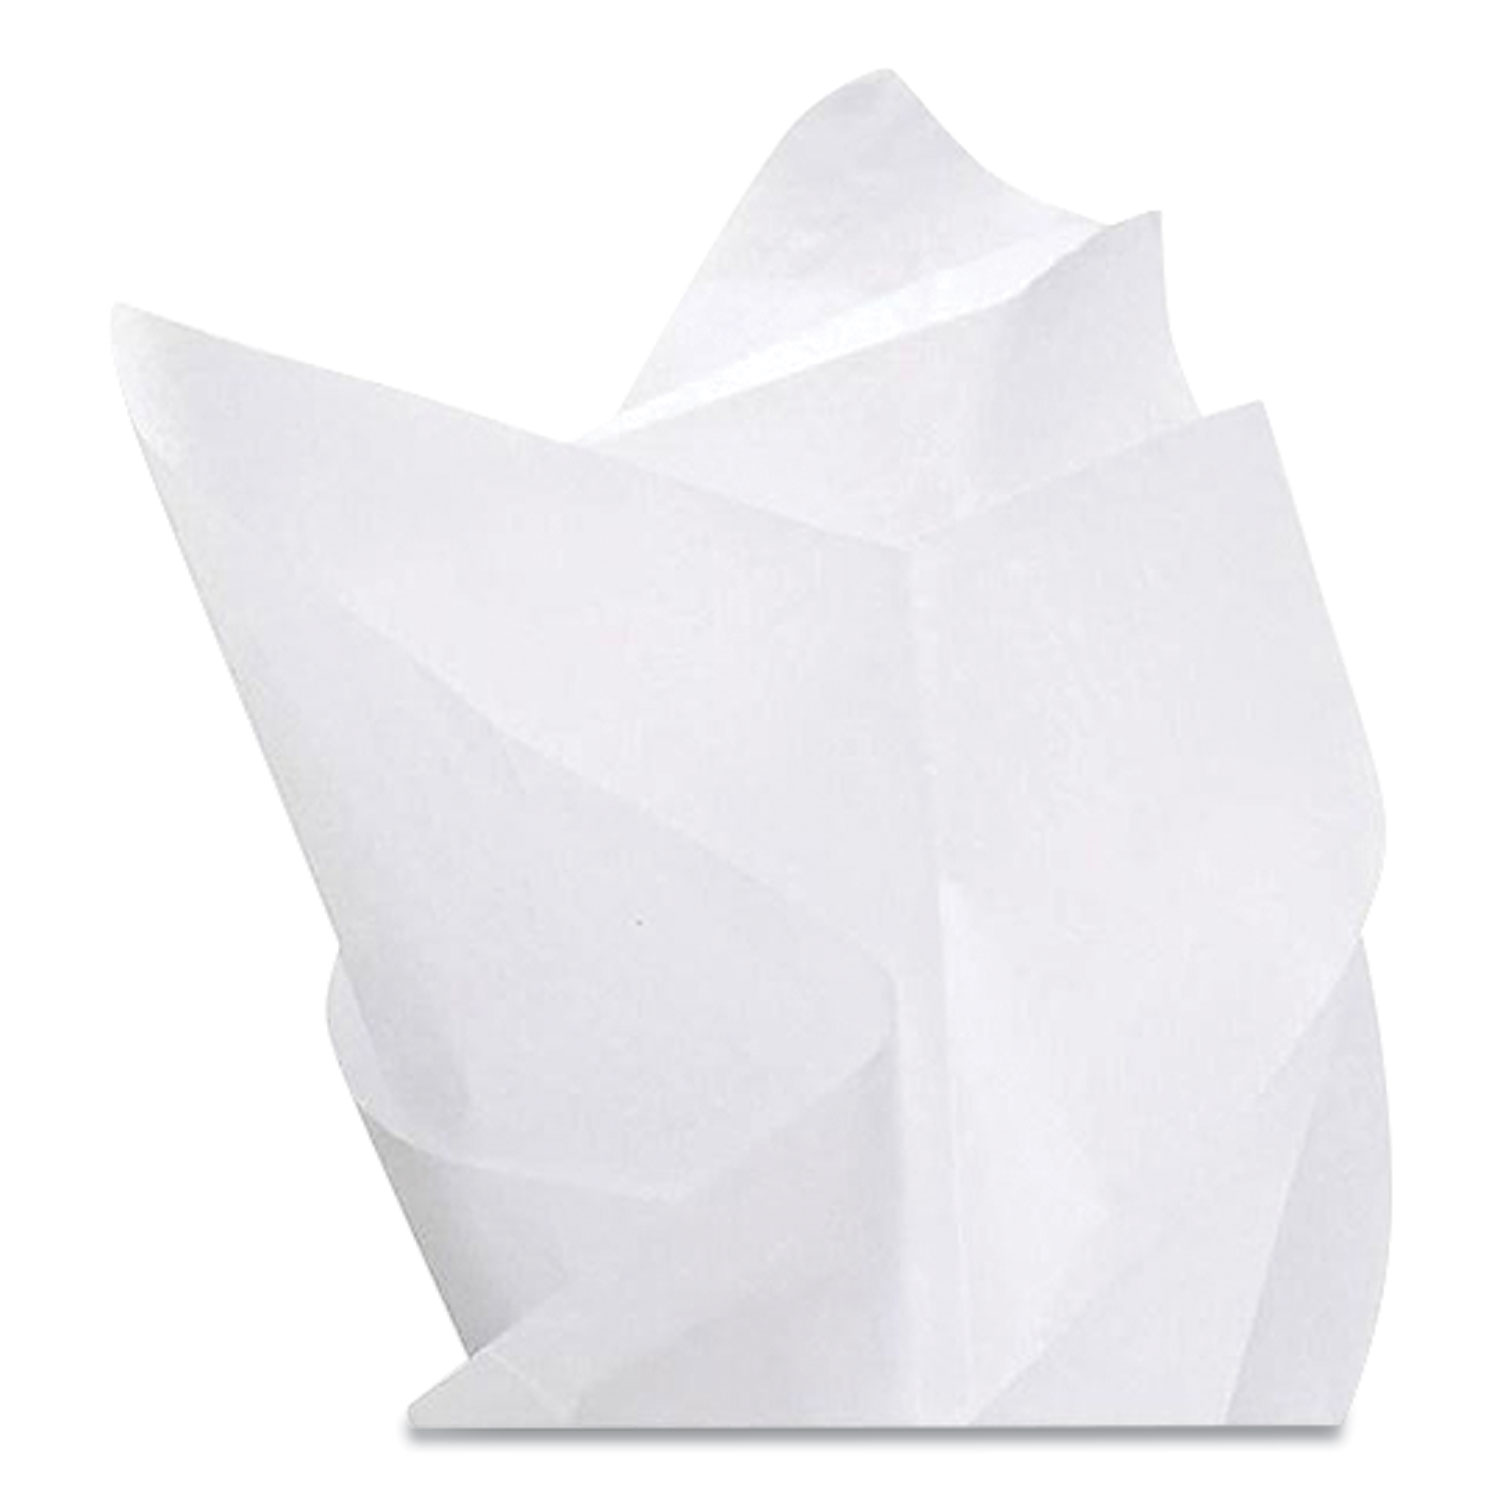 Bags & Bows Tissue Paper, 20 x 30, White, 480 Sheets/Pack, 5 Packs/Ream